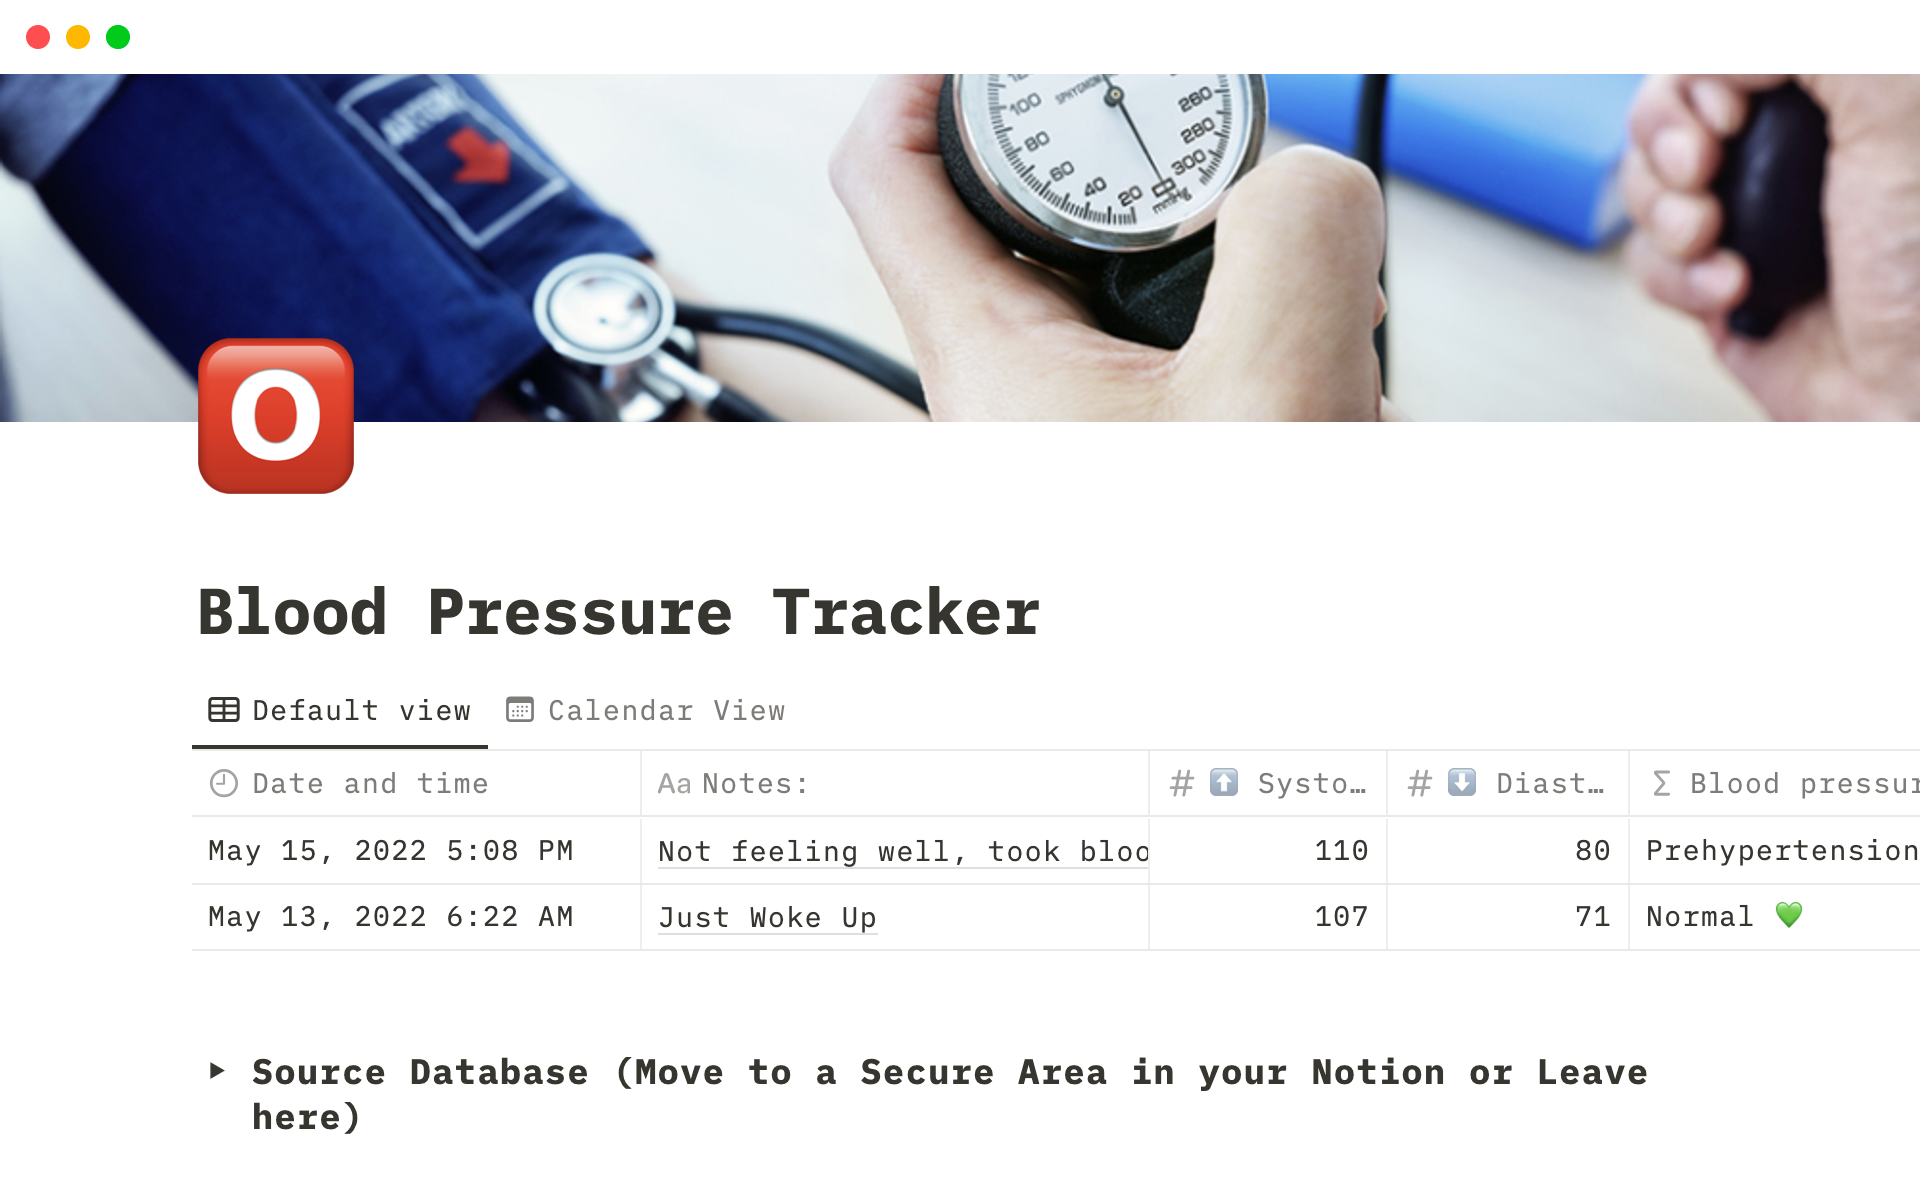 Keep track of your Blood Pressure